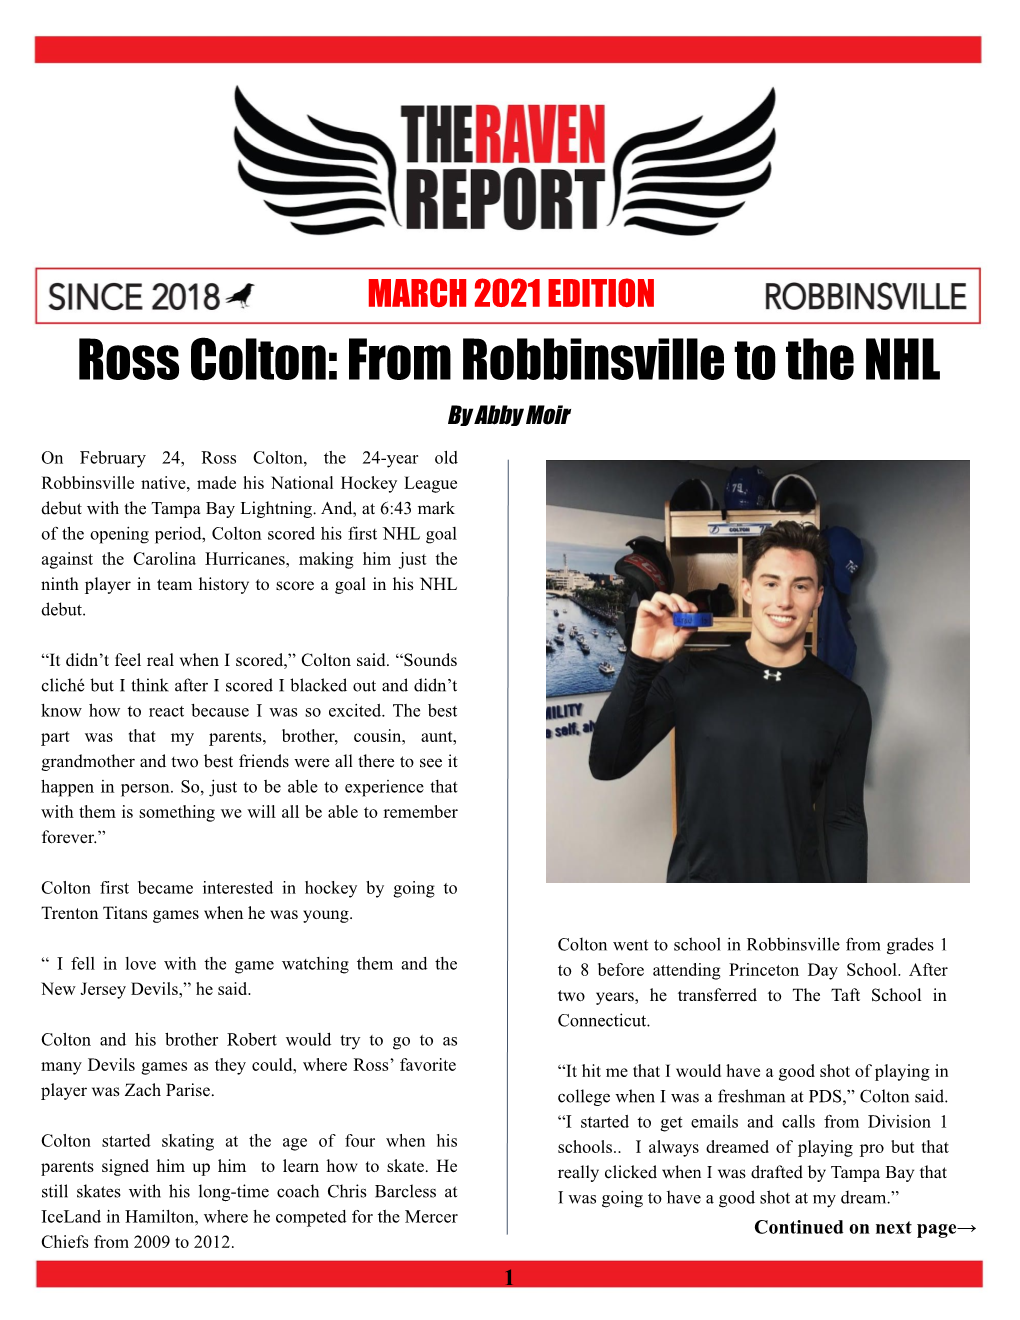 Ross Colton: from Robbinsville to the NHL by Abby Moir